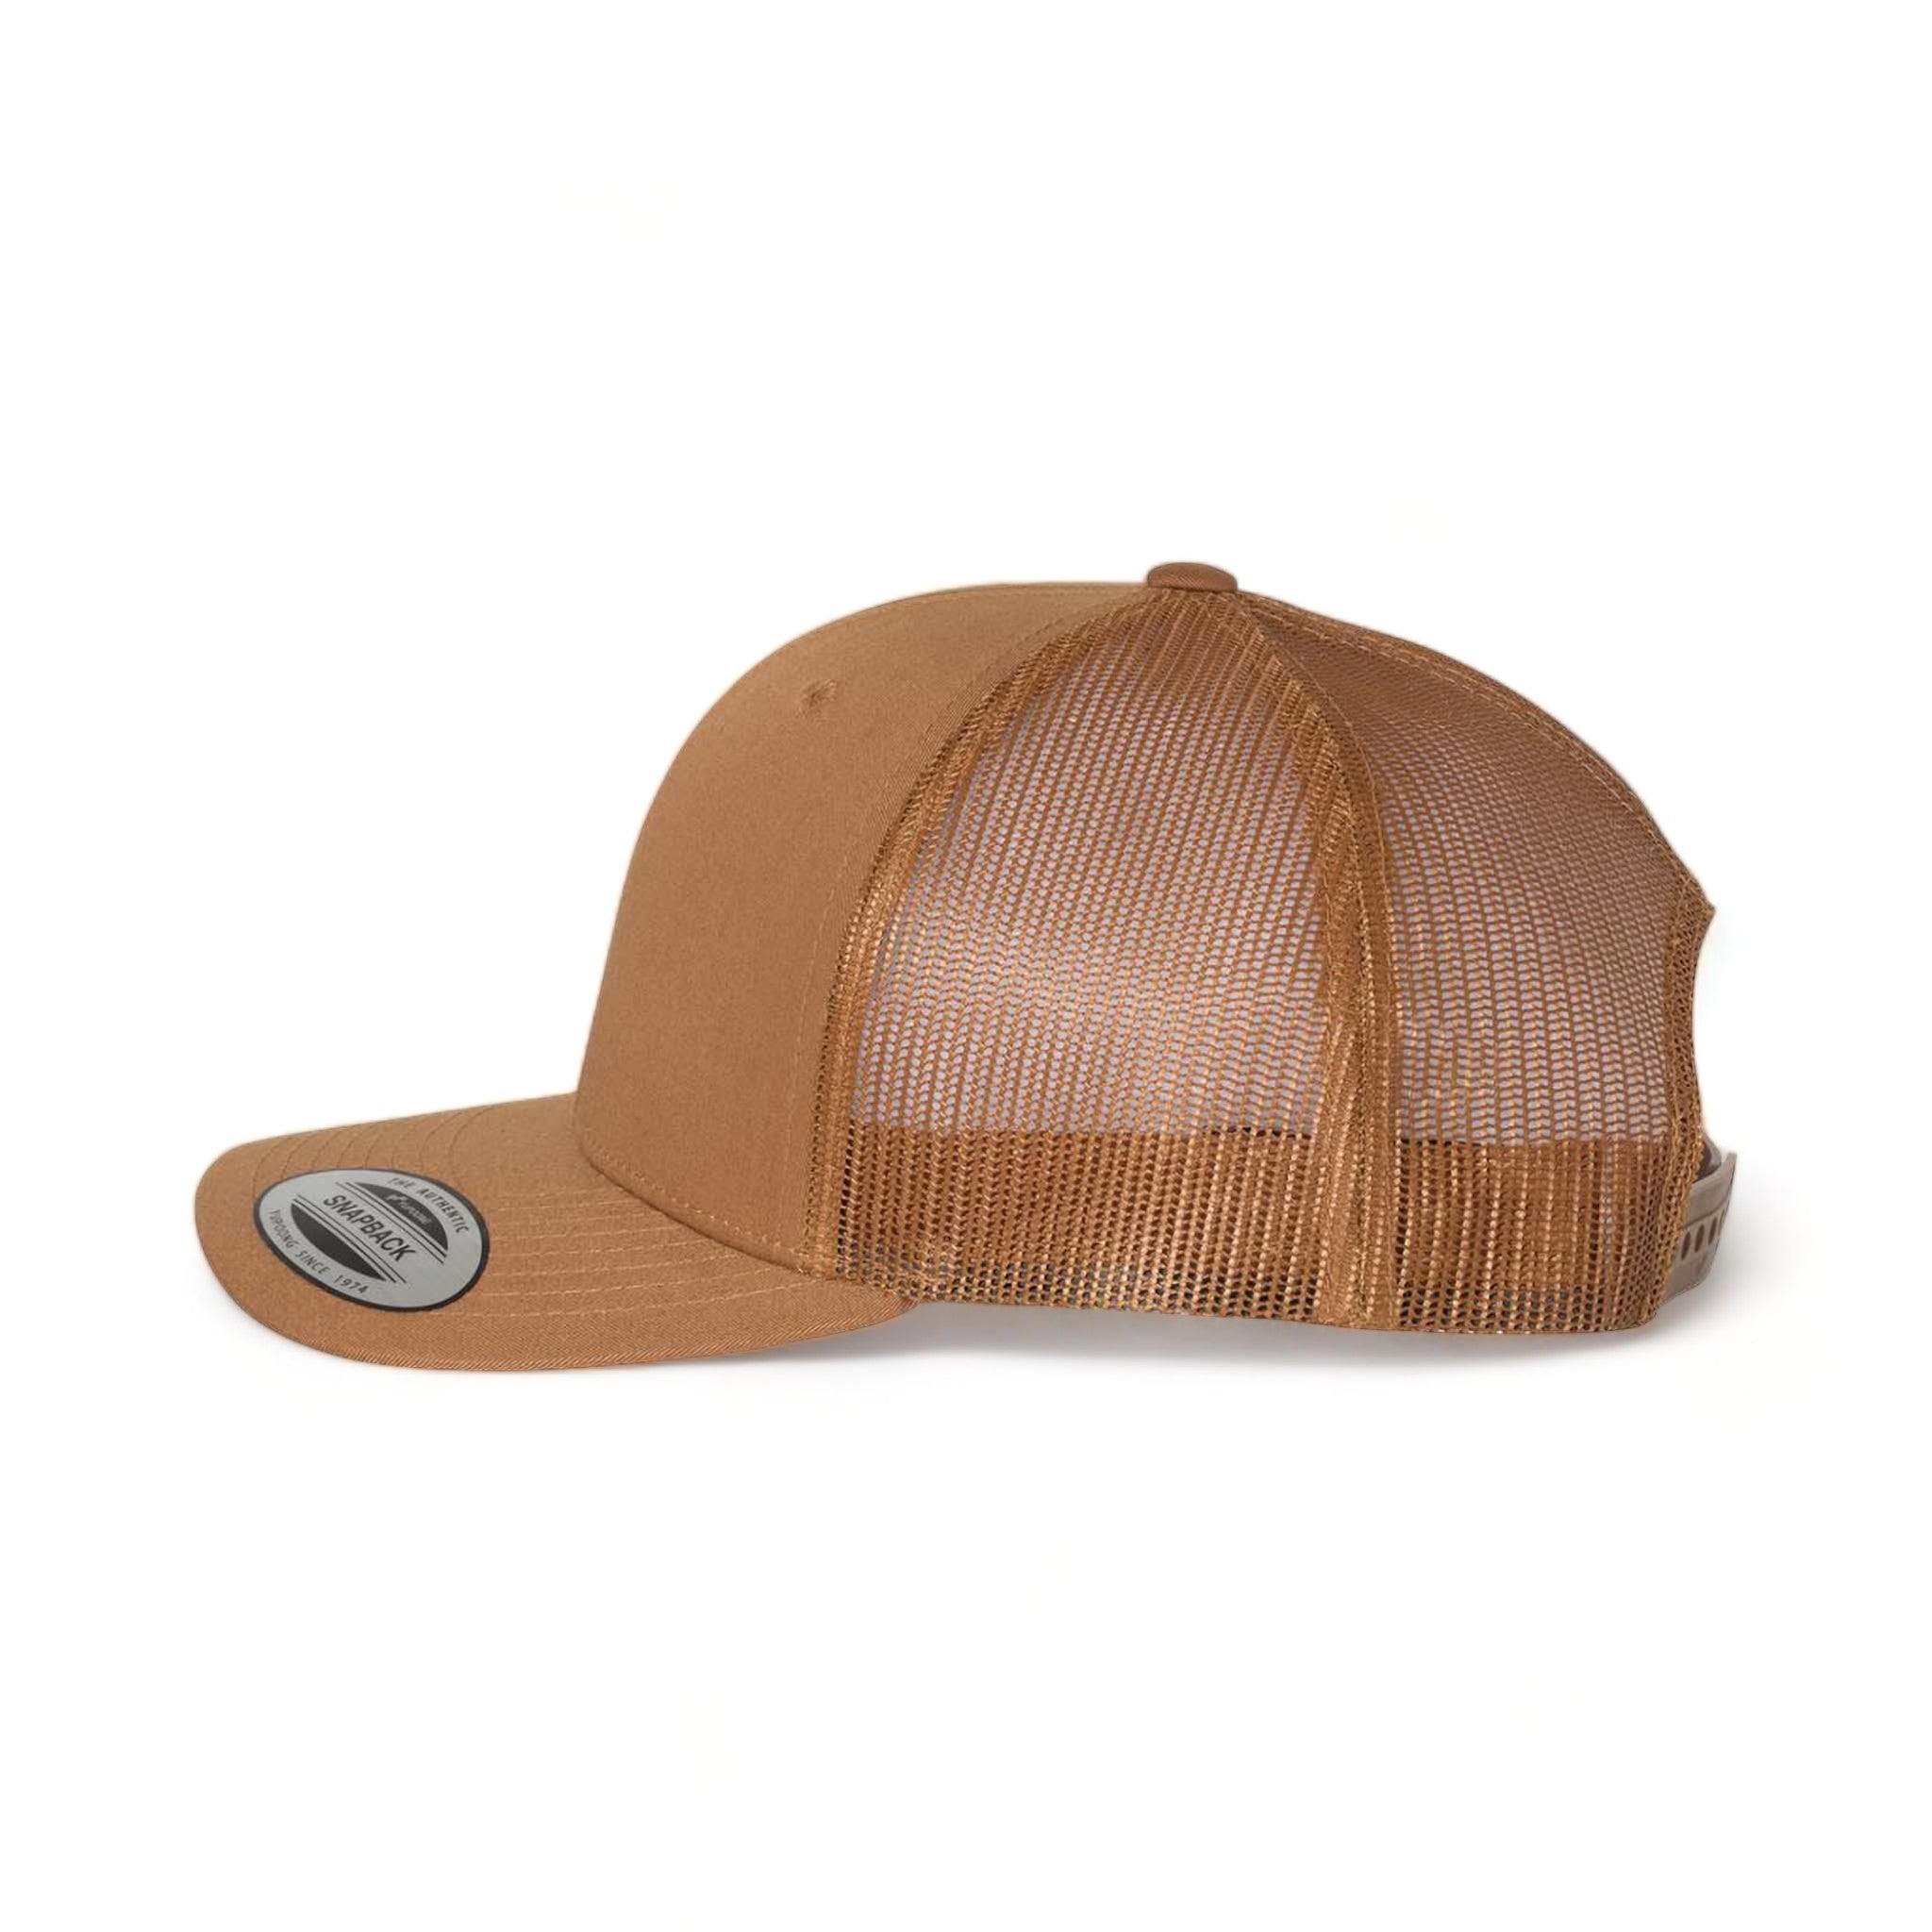 Side view of YP Classics 6606 custom hat in caramel